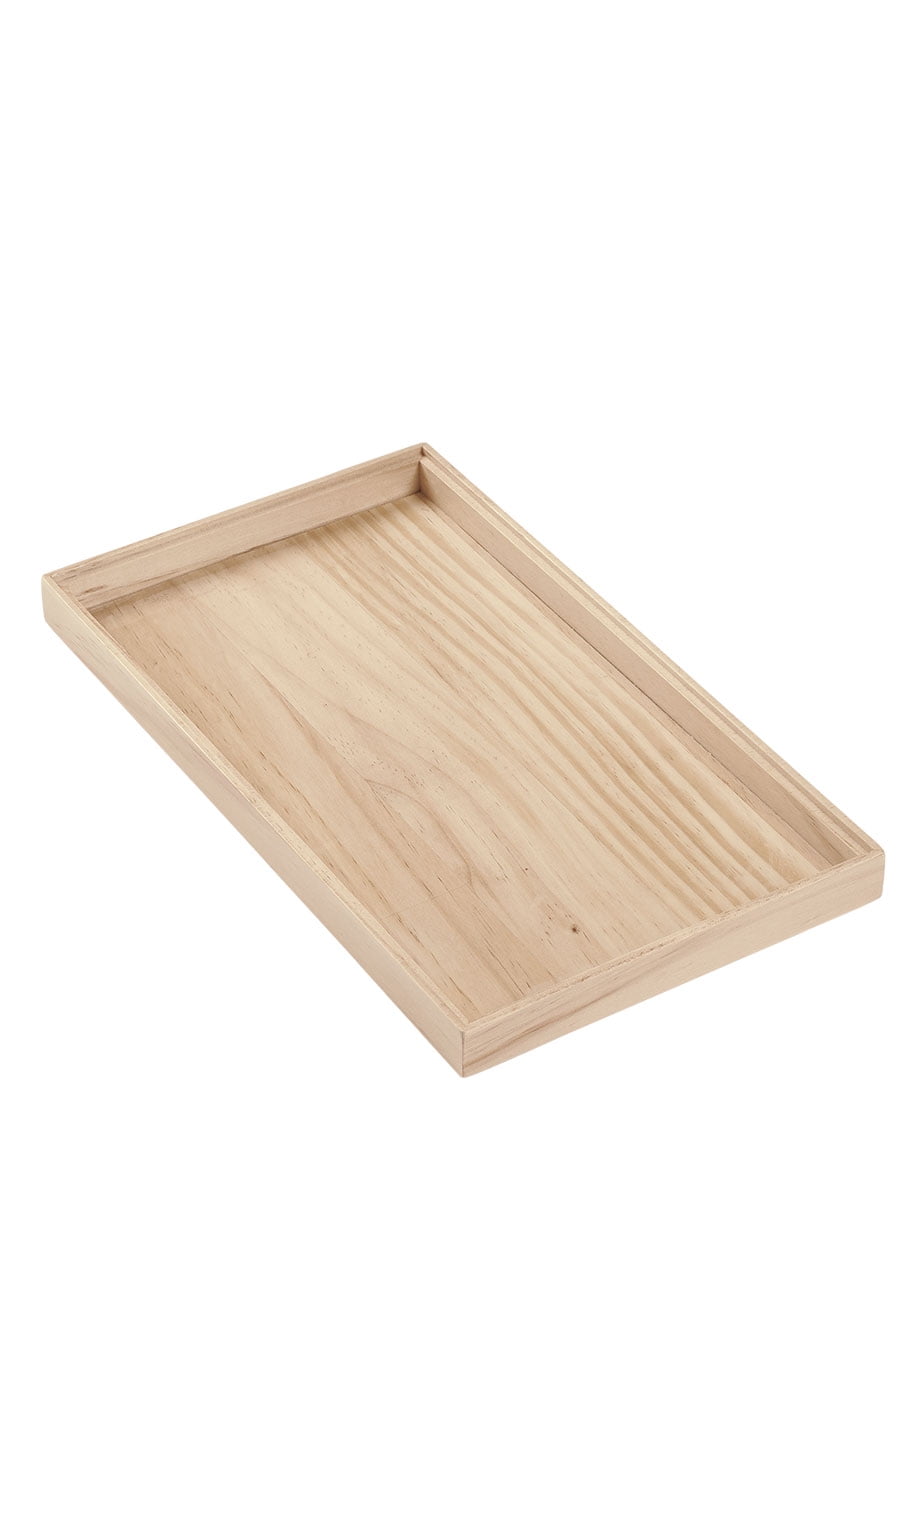 Natural Wood Sample Display Tray Wooden Jewelry Organizer 15" x 8 1/2" x 1" 